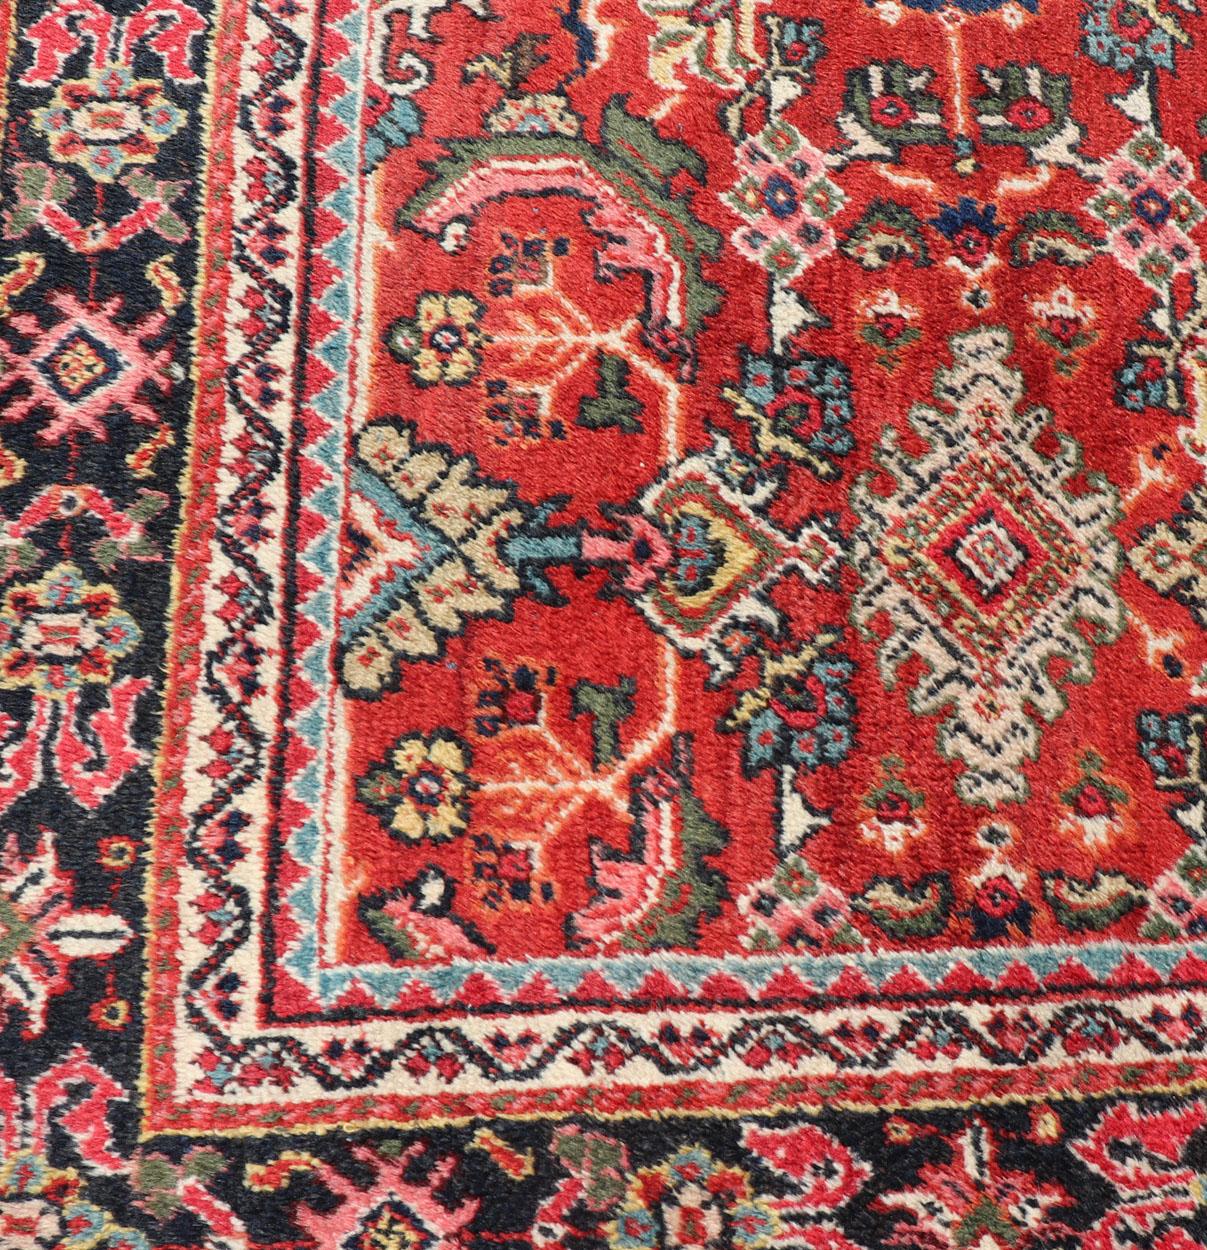 This rug is replete with an all-over symmetrical sub-geometric design set upon a red background and enclosed within a complementary border.

Persian Mahal carpet set on a red field, rug PTA-200714, country of origin / type: Iran / Sultanabad, circa